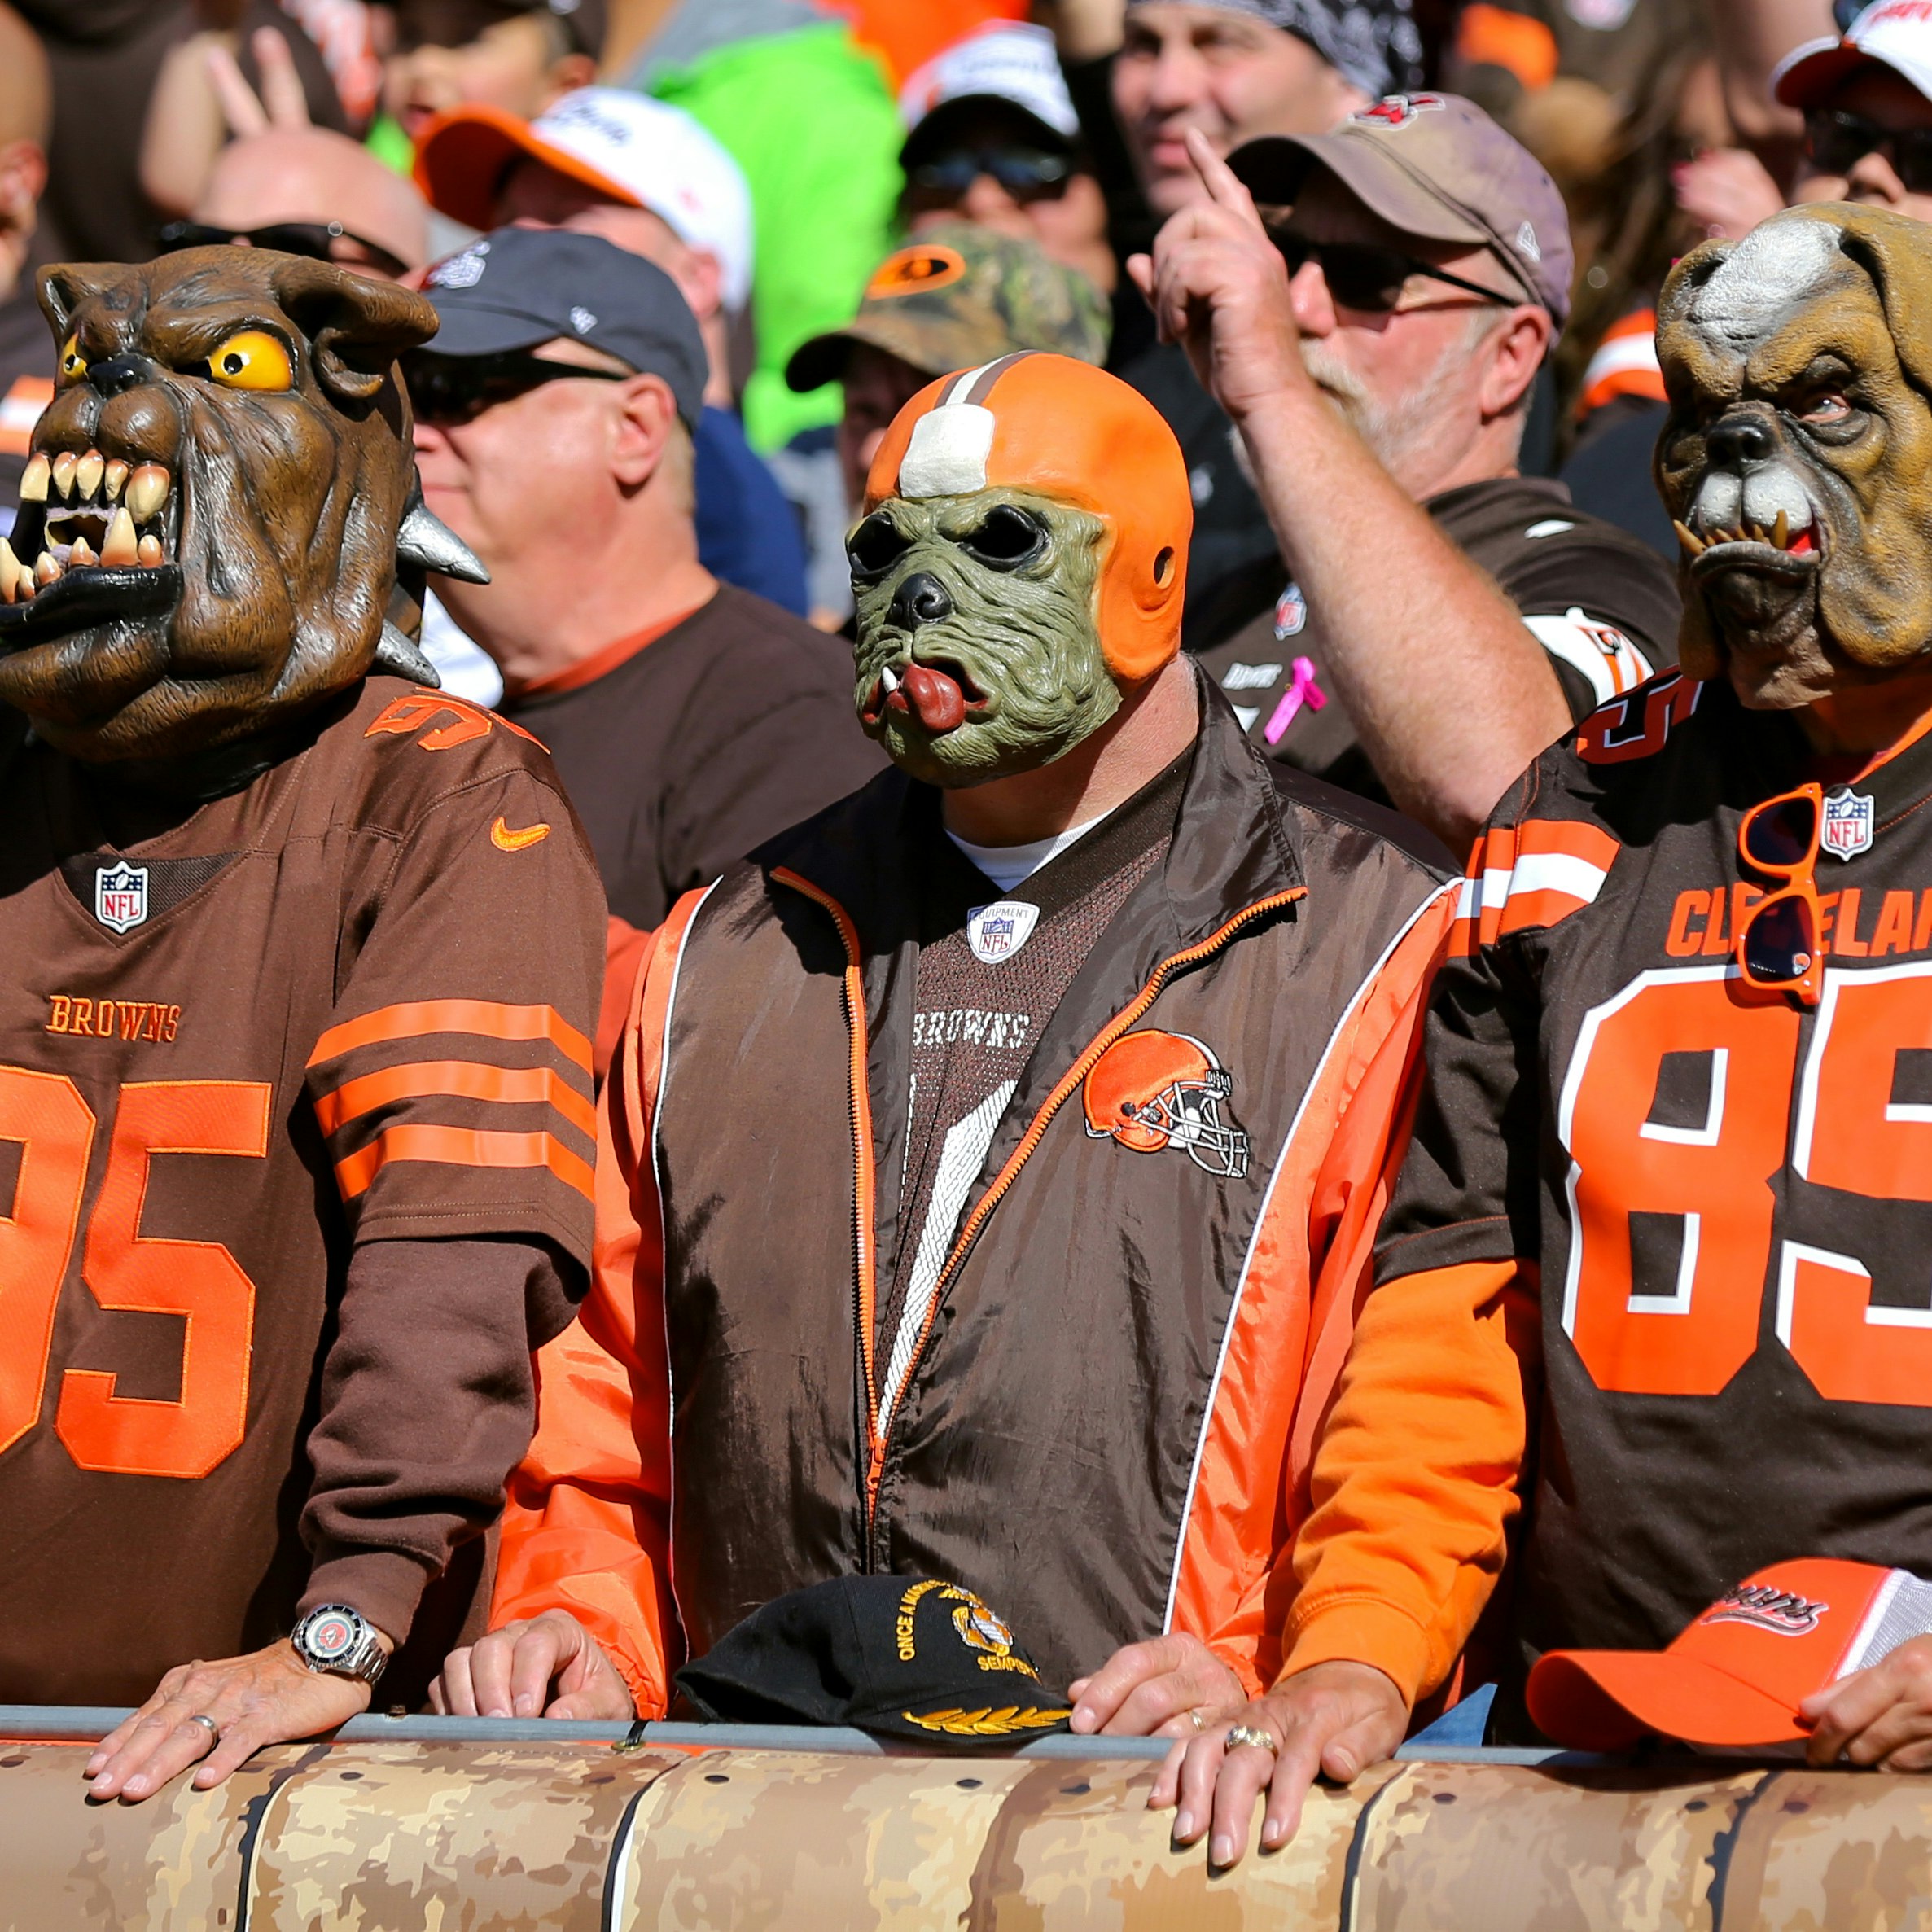 CLEVELAND, OH - OCTOBER 13: Cleveland Browns fans in dog masks in the Dawg Pound during the second quarter of the National Football League game between the Seattle Seahawks and Cleveland Browns on October 13, 2019, at FirstEnergy Stadium in Cleveland, OH. (Photo by Frank Jansky/Icon Sportswire via Getty Images)